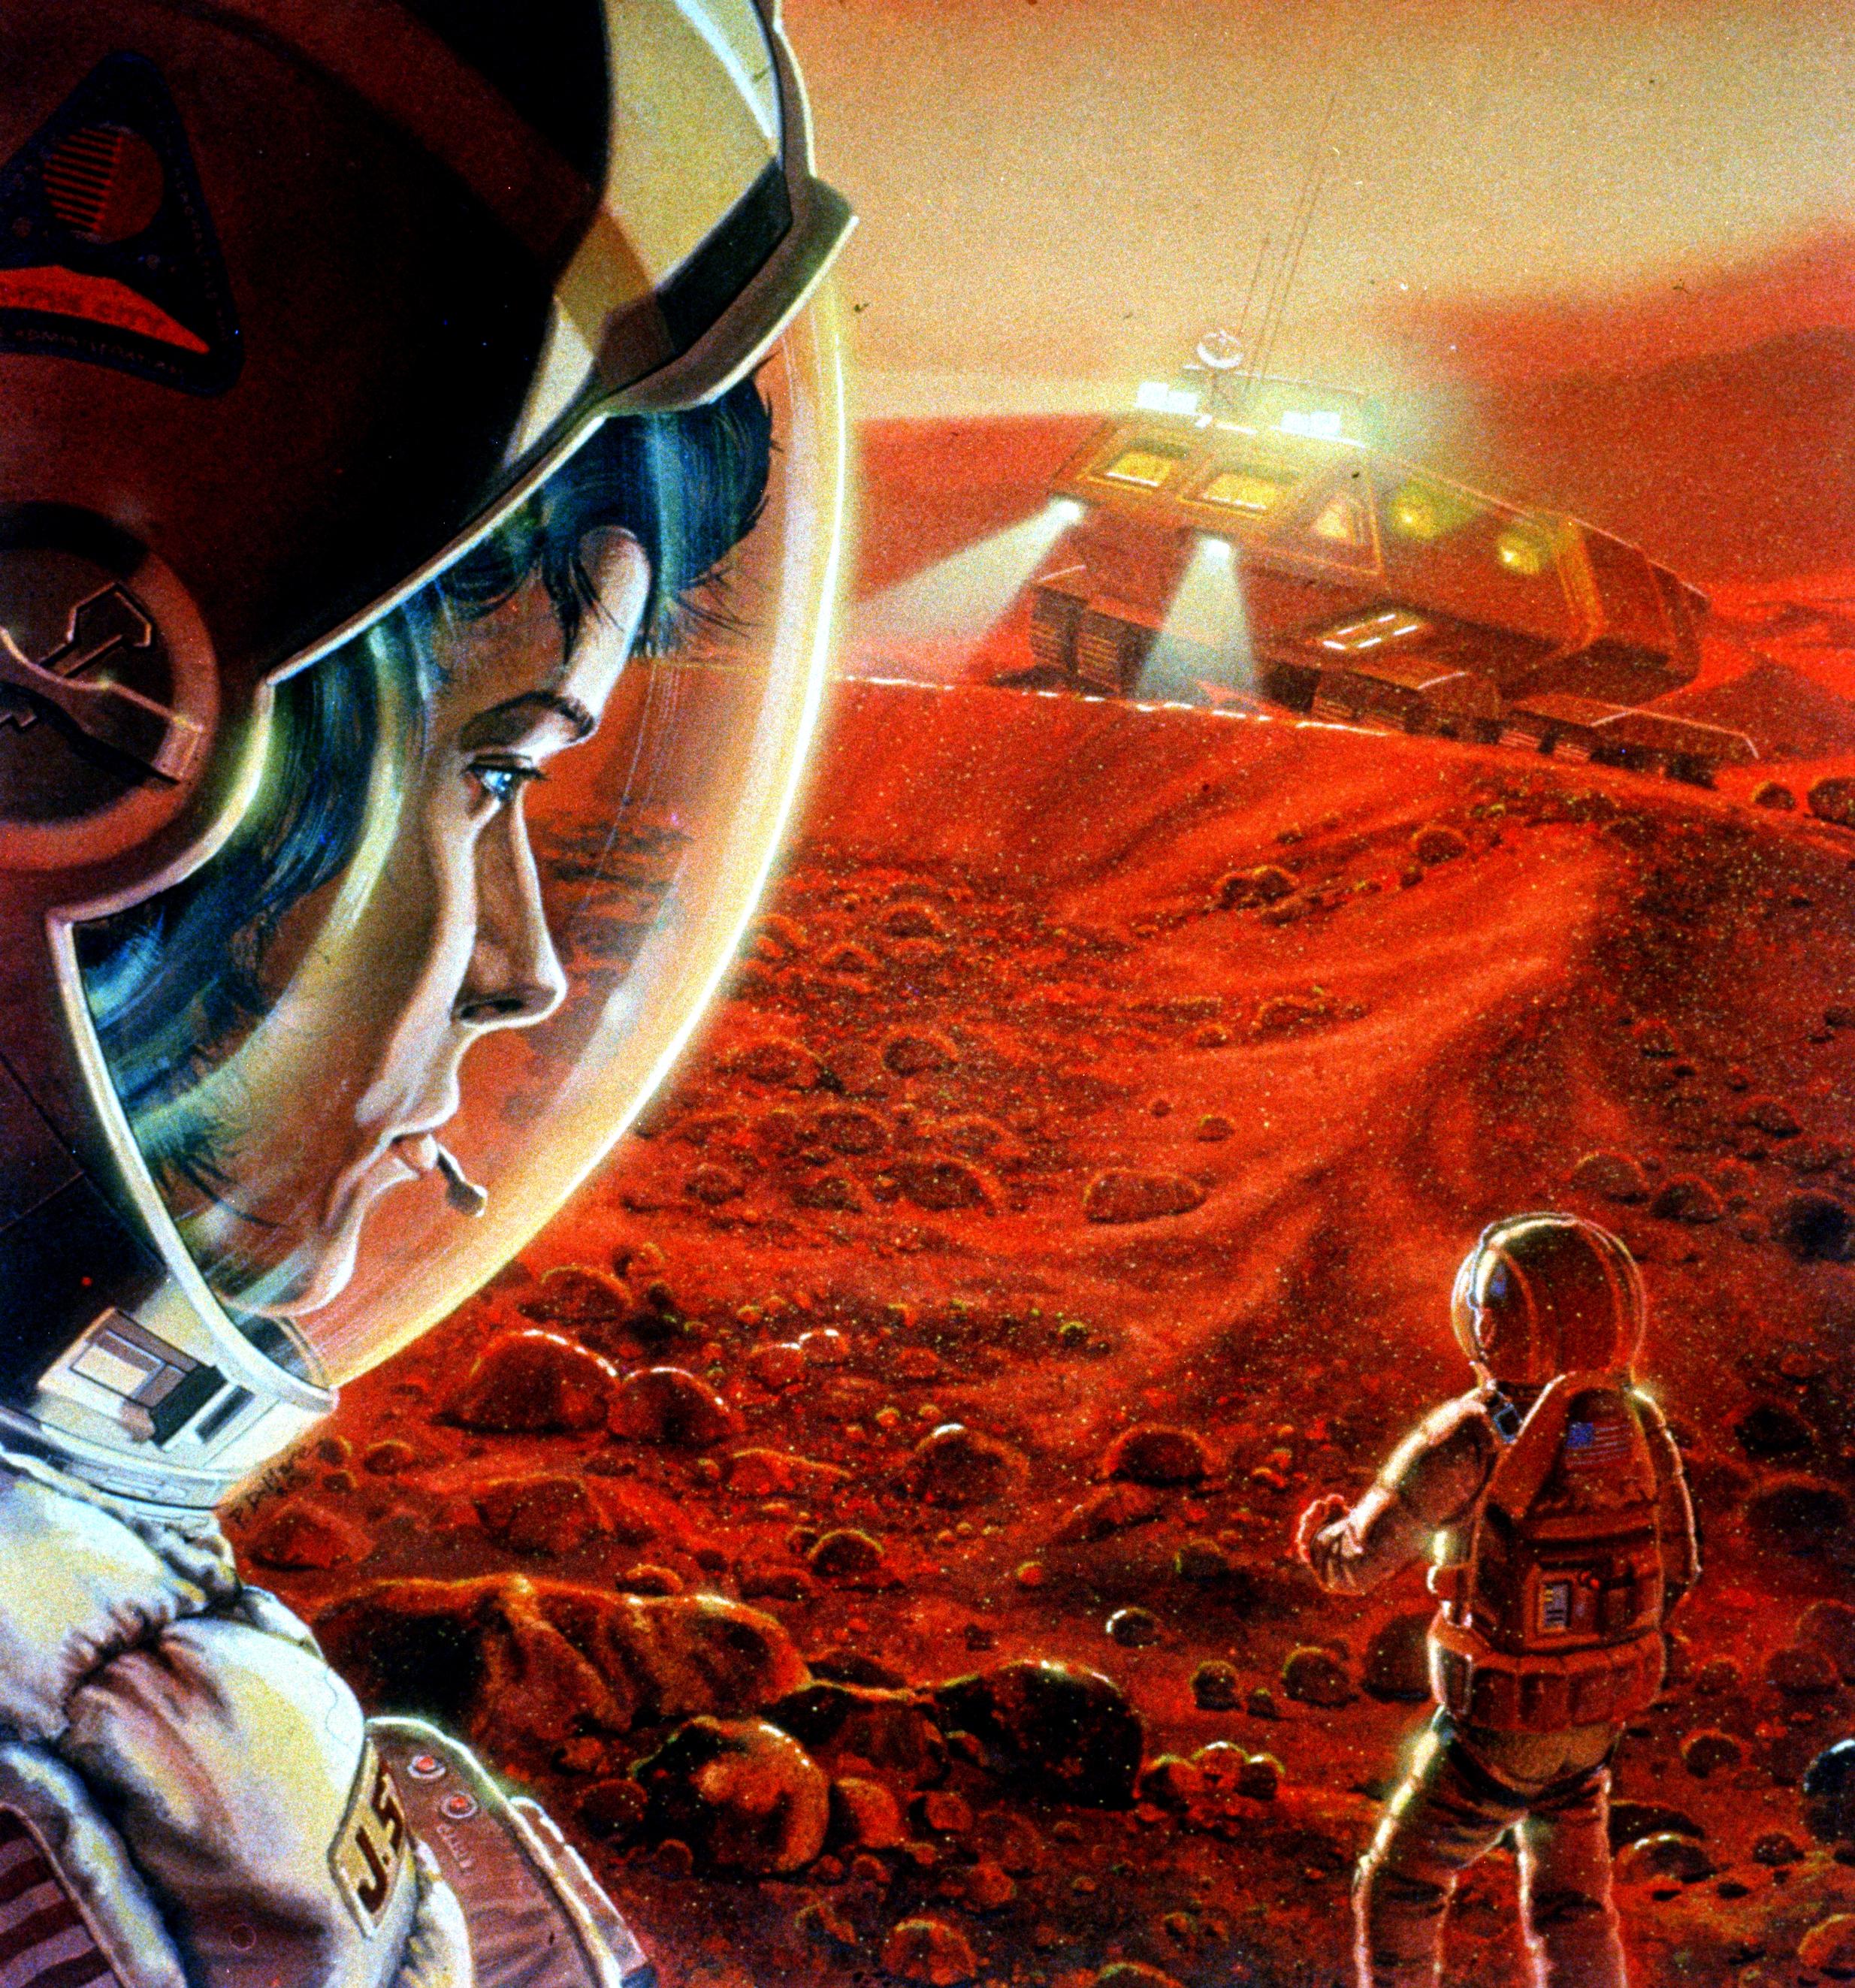 In this artist's concept, an astronaut in the foreground looks back at a fellow astronaut.  Behind them both is a vehicle with its headlights beaming.